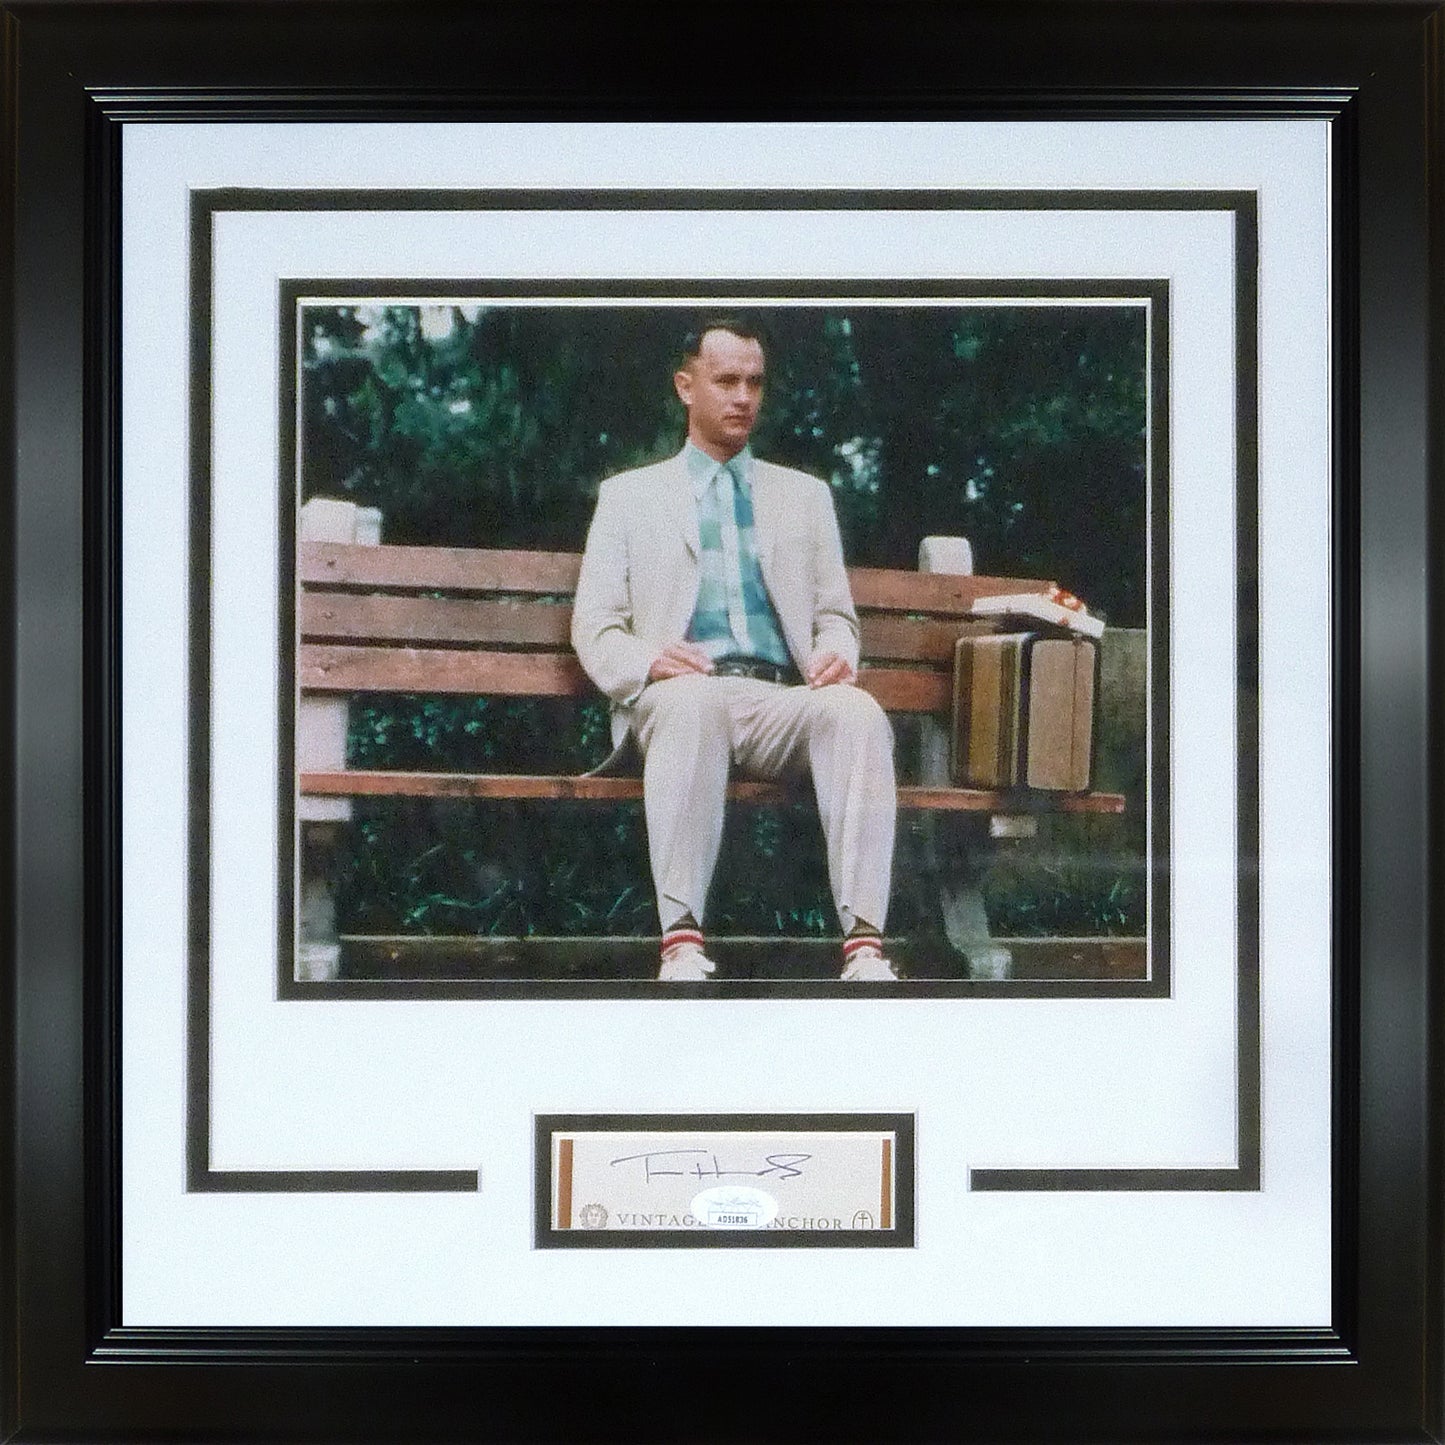 Tom Hanks Autographed Forrest Gump On Bench Frame with 8x10 and signature - JSA